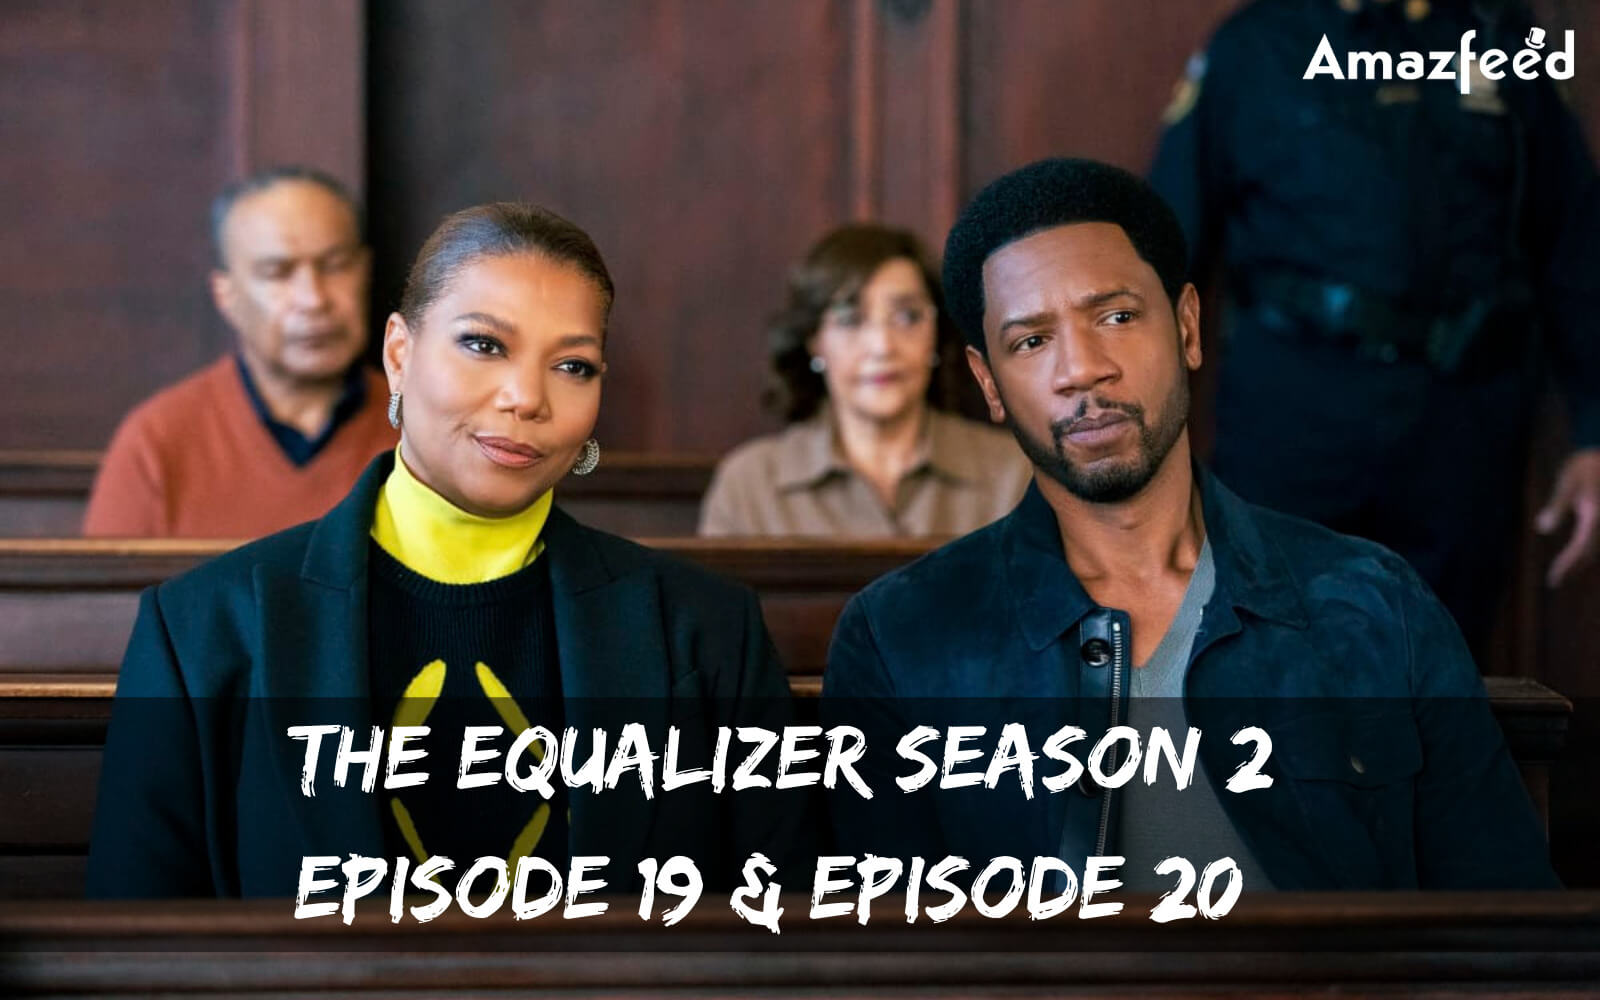 The Equalizer Season 2 Episode 19 & Episode 20 release date